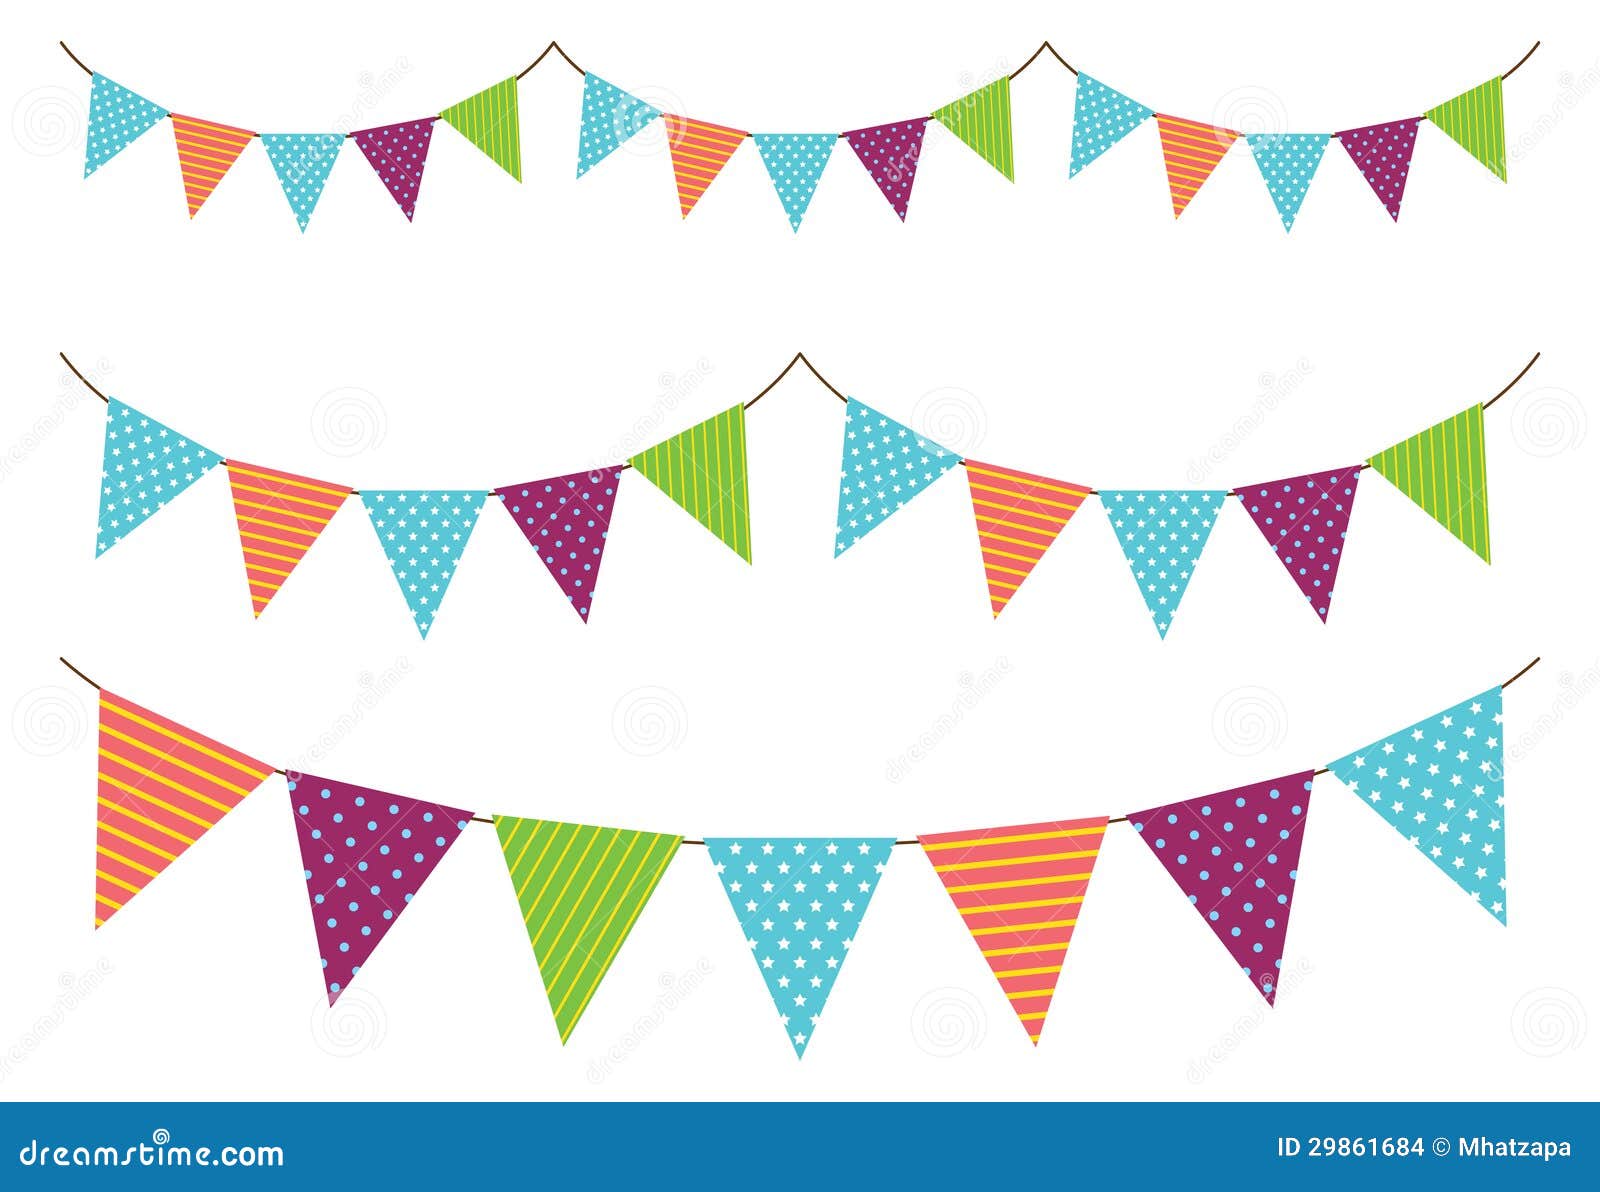 bunting banner clip art free - photo #29